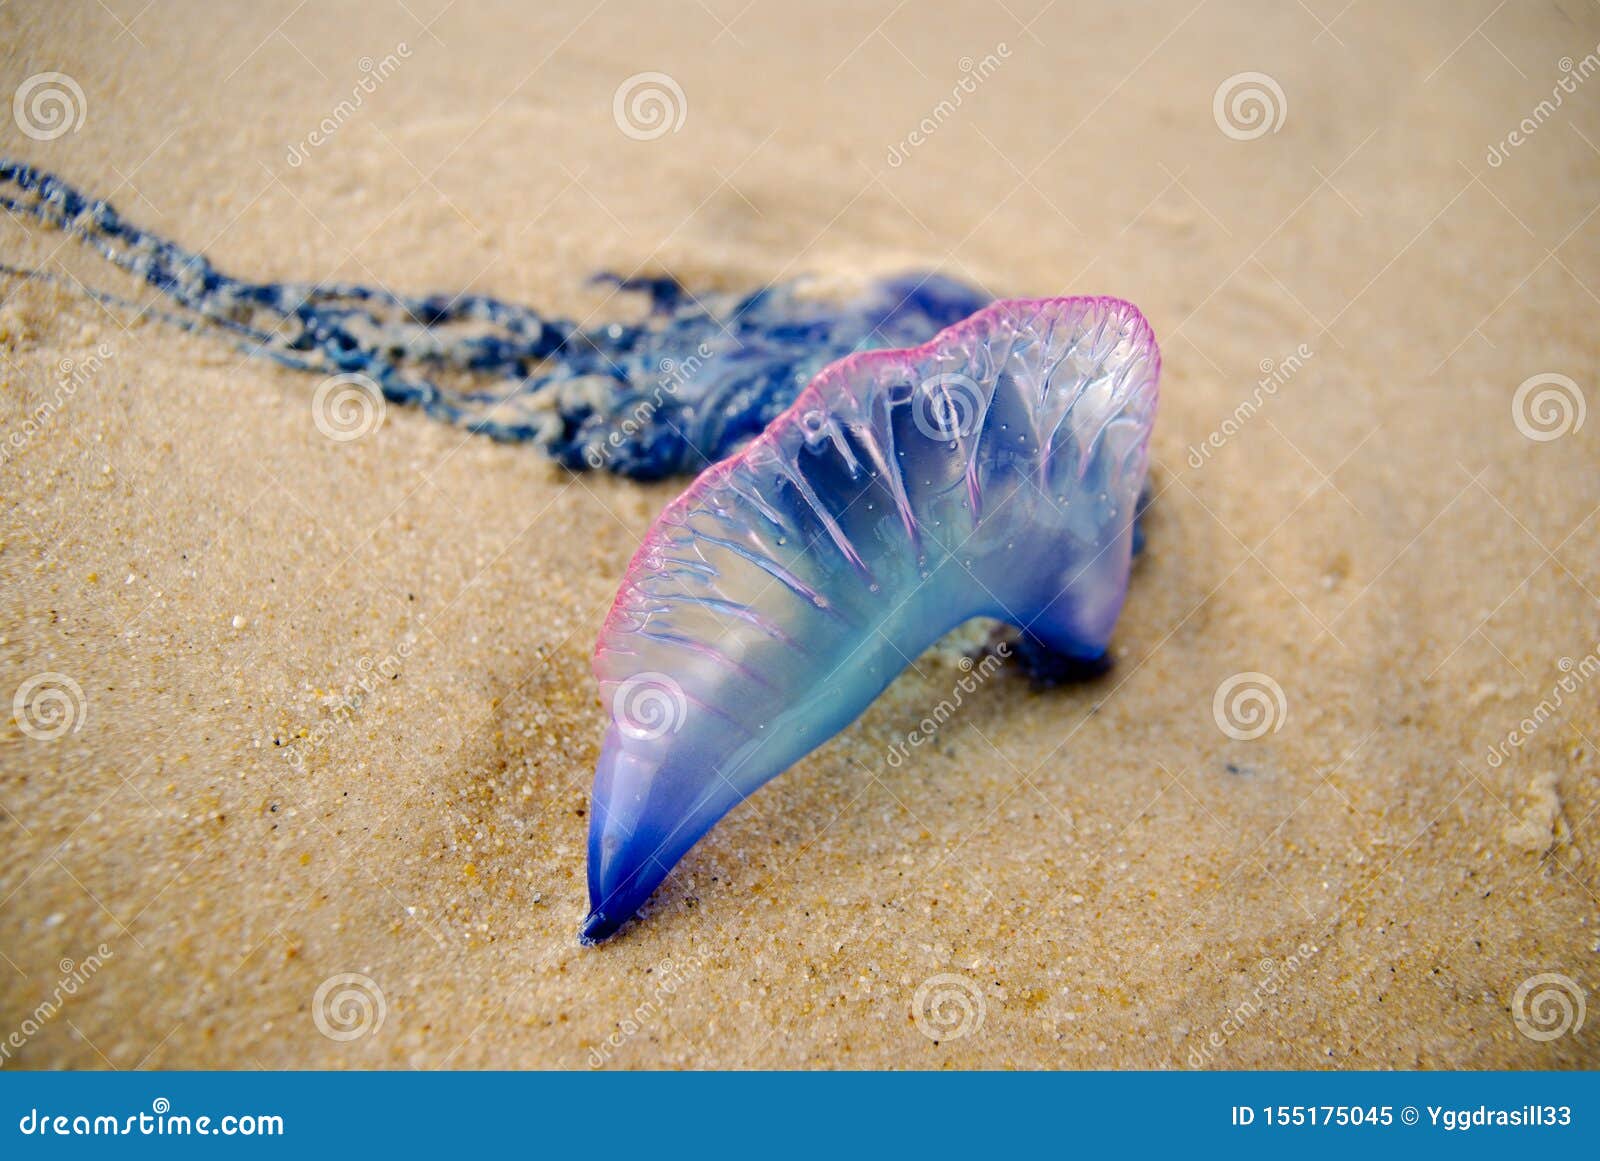 Physalia or Man-o-war Jellyfish on the Beach Stock Image - Image of nature,  shore: 155175045